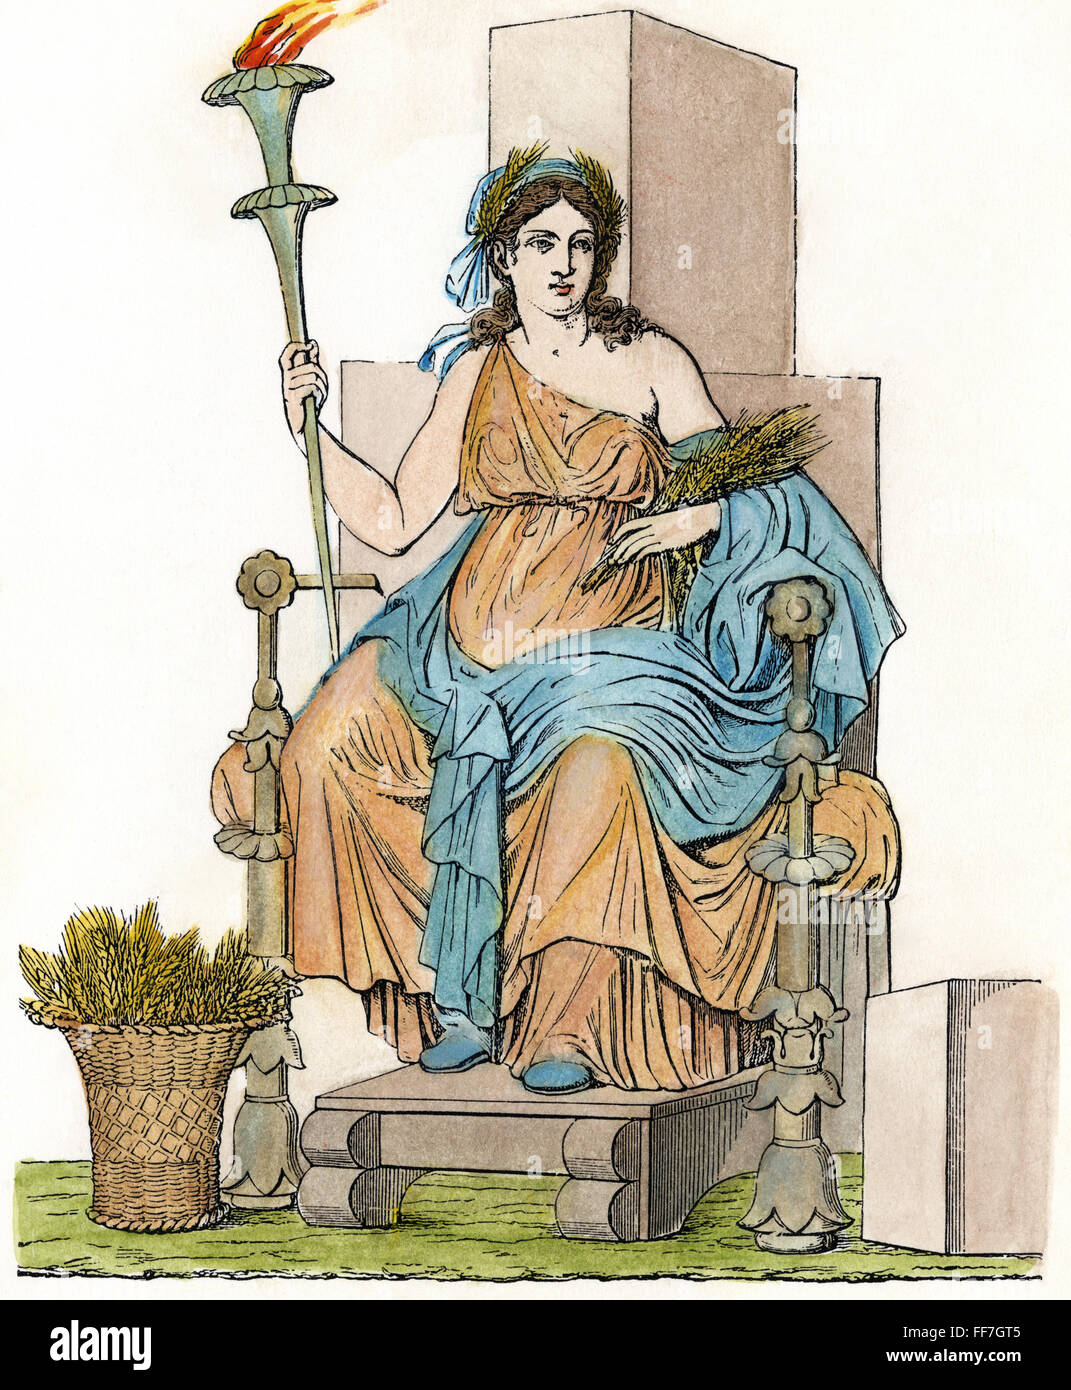 DEMETER/CERES. /nThe Greek goddess (Roman goddess Ceres) of the growth of food plants, enthroned with her attribute of wheat. /nLine engraving after a wall painting in Pompeii, Italy, 19th century. Stock Photo